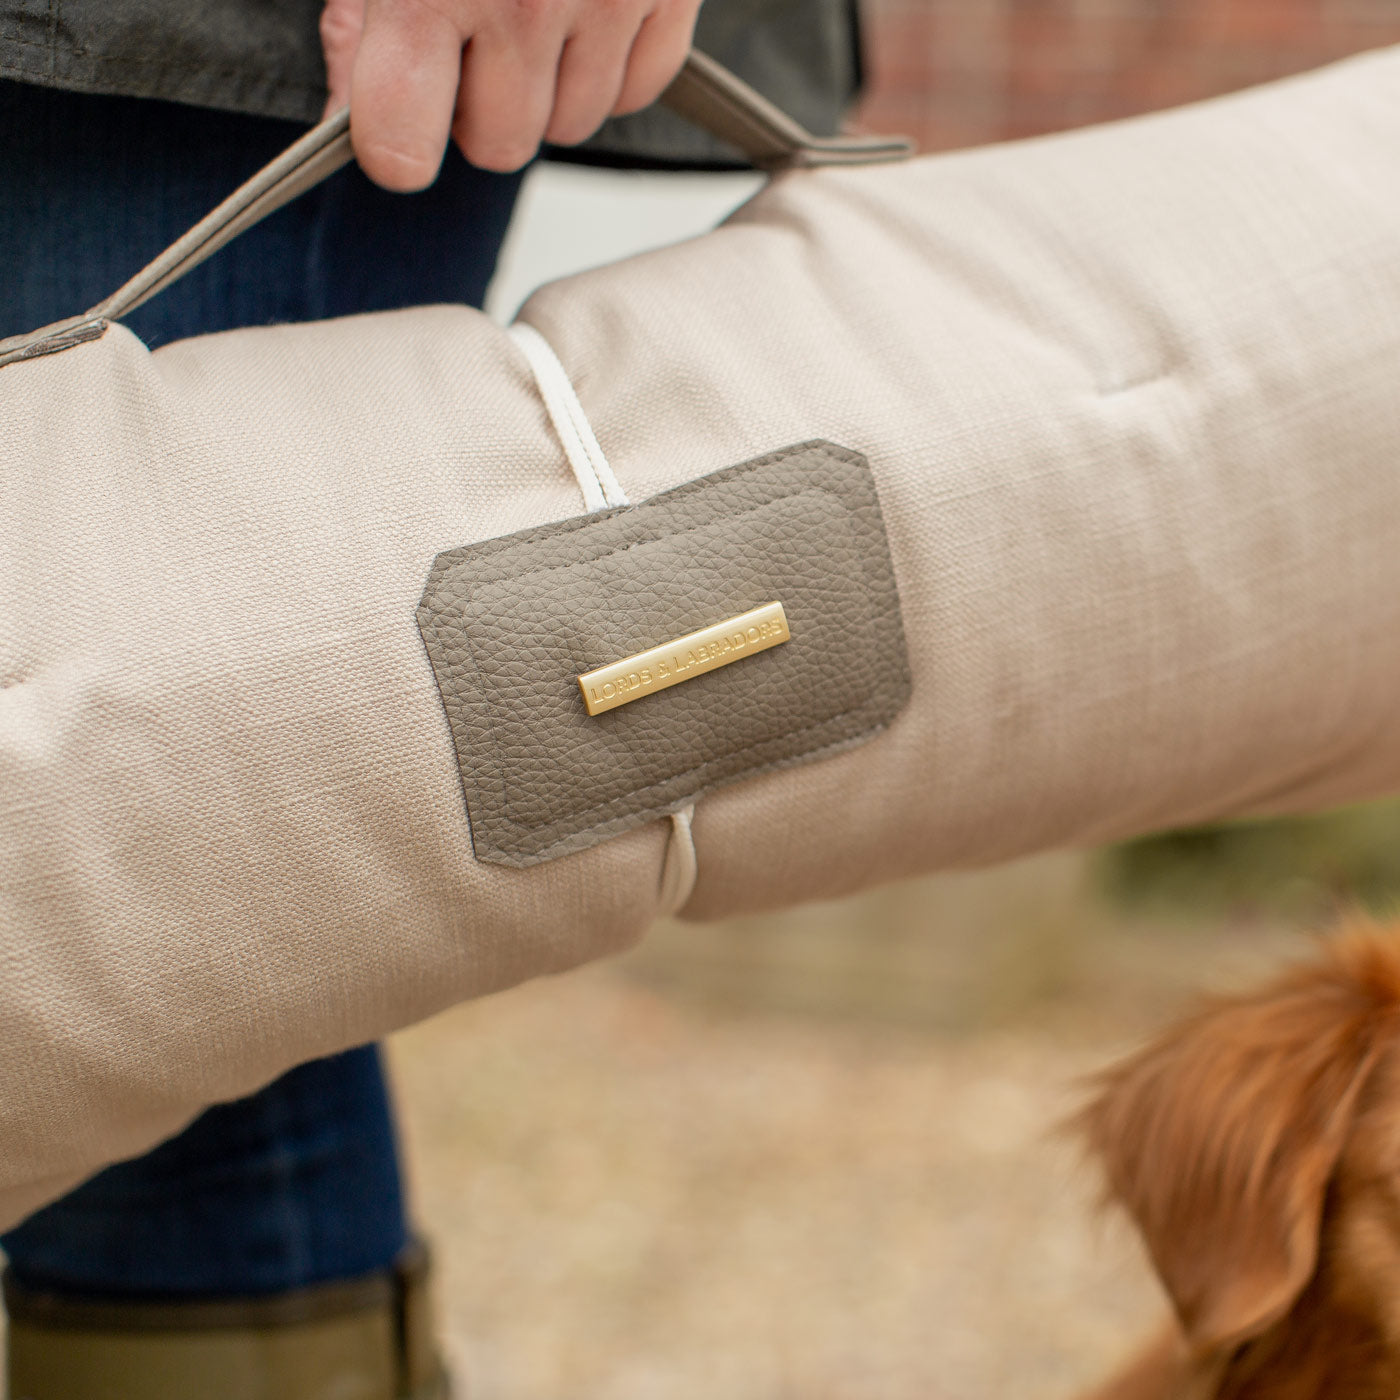 Embark on the perfect pet travel with our luxury Travel Mat in Savanna Oatmeal! Featuring a Carry handle for on the move once Rolled up for easy storage, can be used as a seat cover, boot mat or travel bed! Available now at Lords & Labradors US